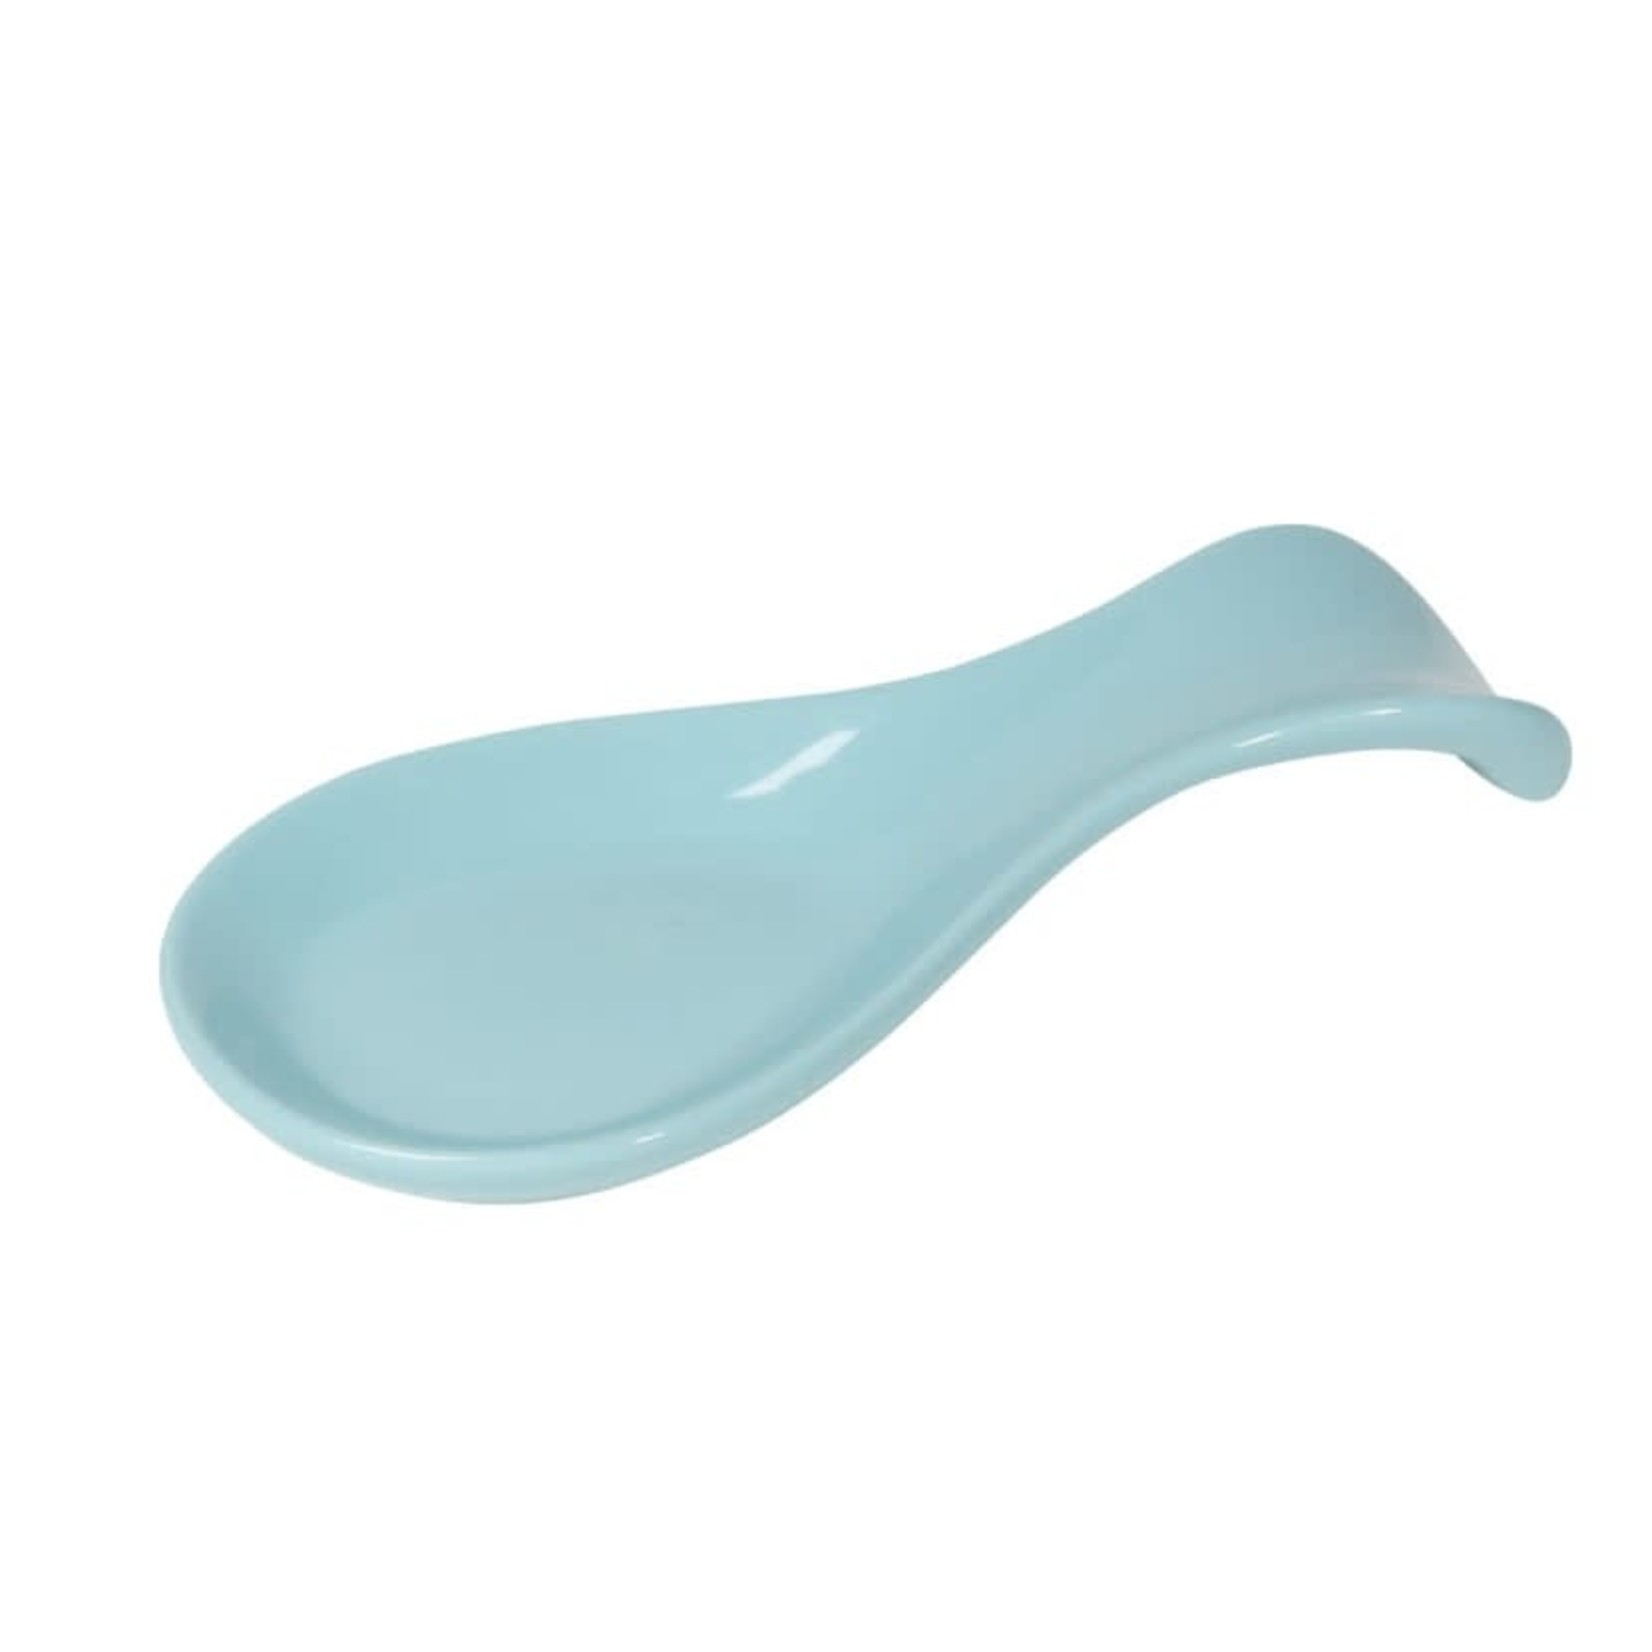 NOW DESIGNS NOW DESIGNS Spoon Rest - Eggshell